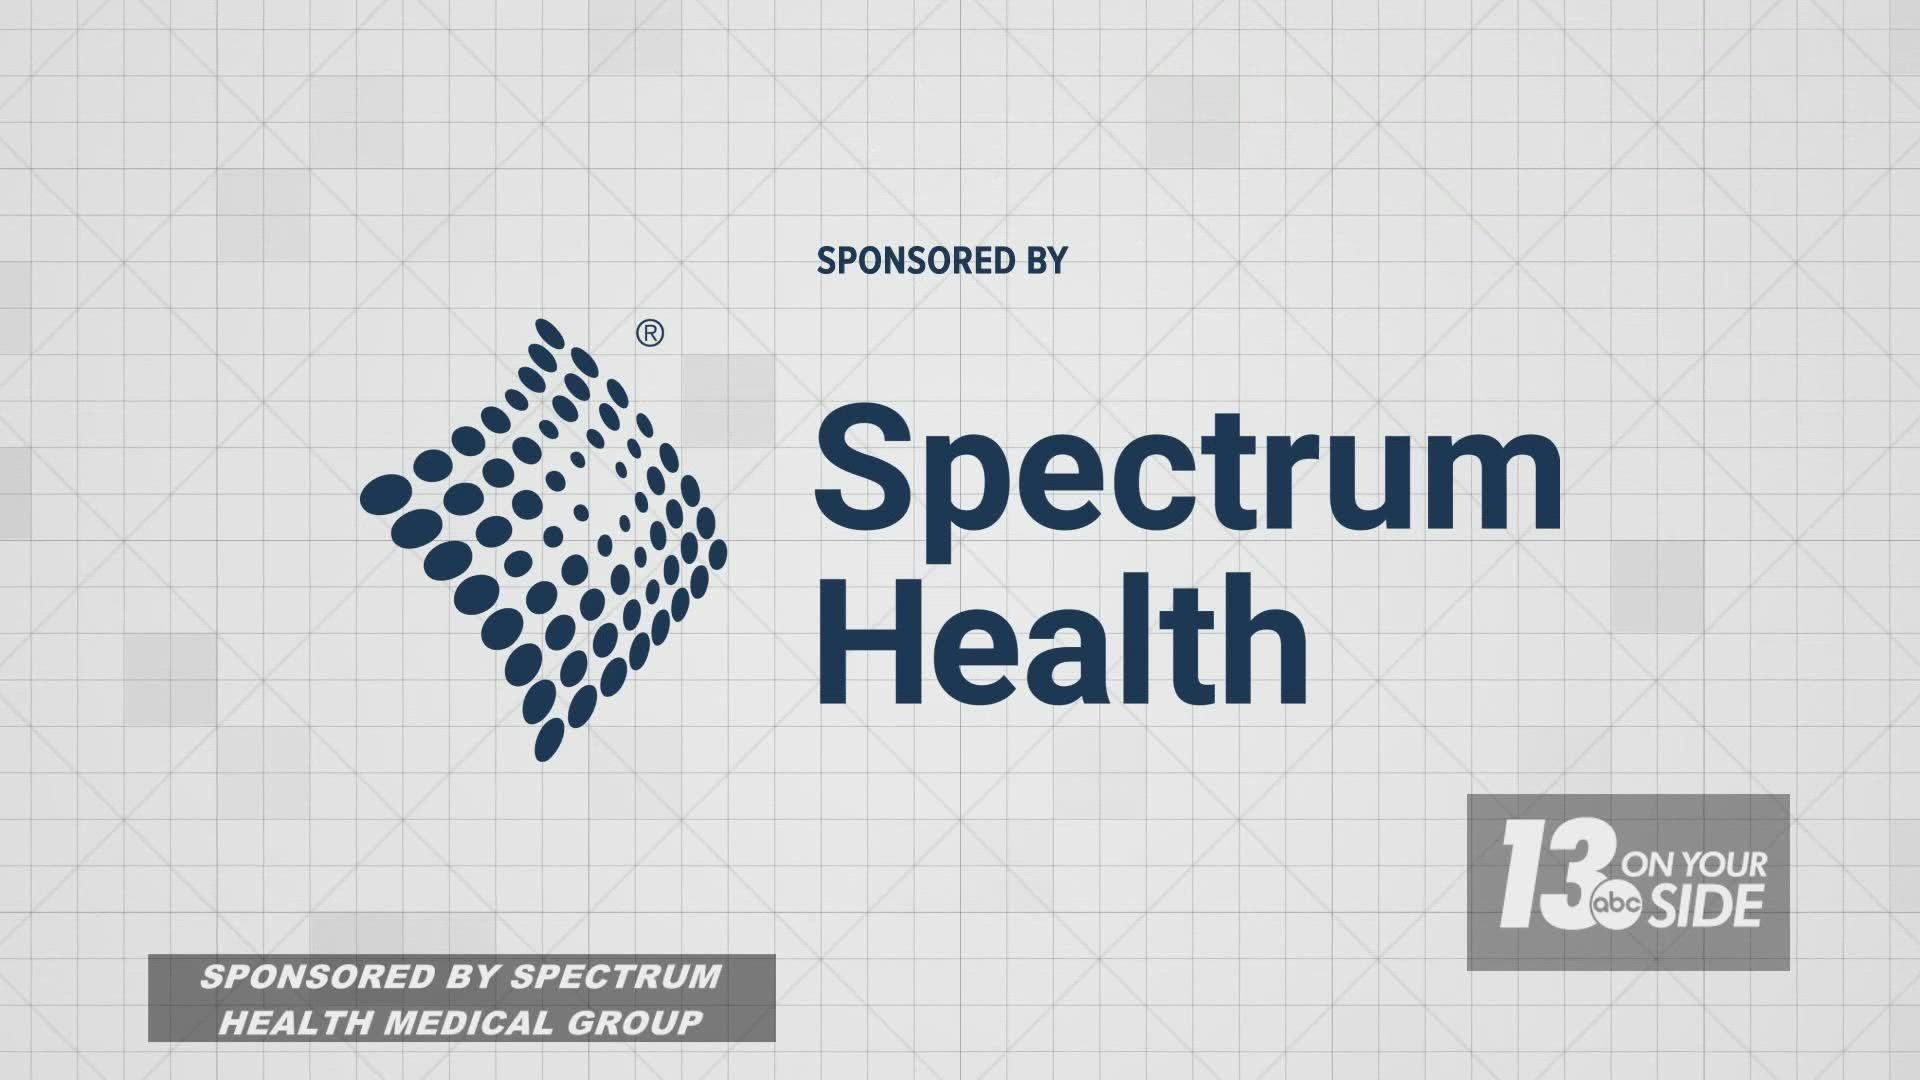 The team from Spectrum Health has served five years as a medical provider at the race.